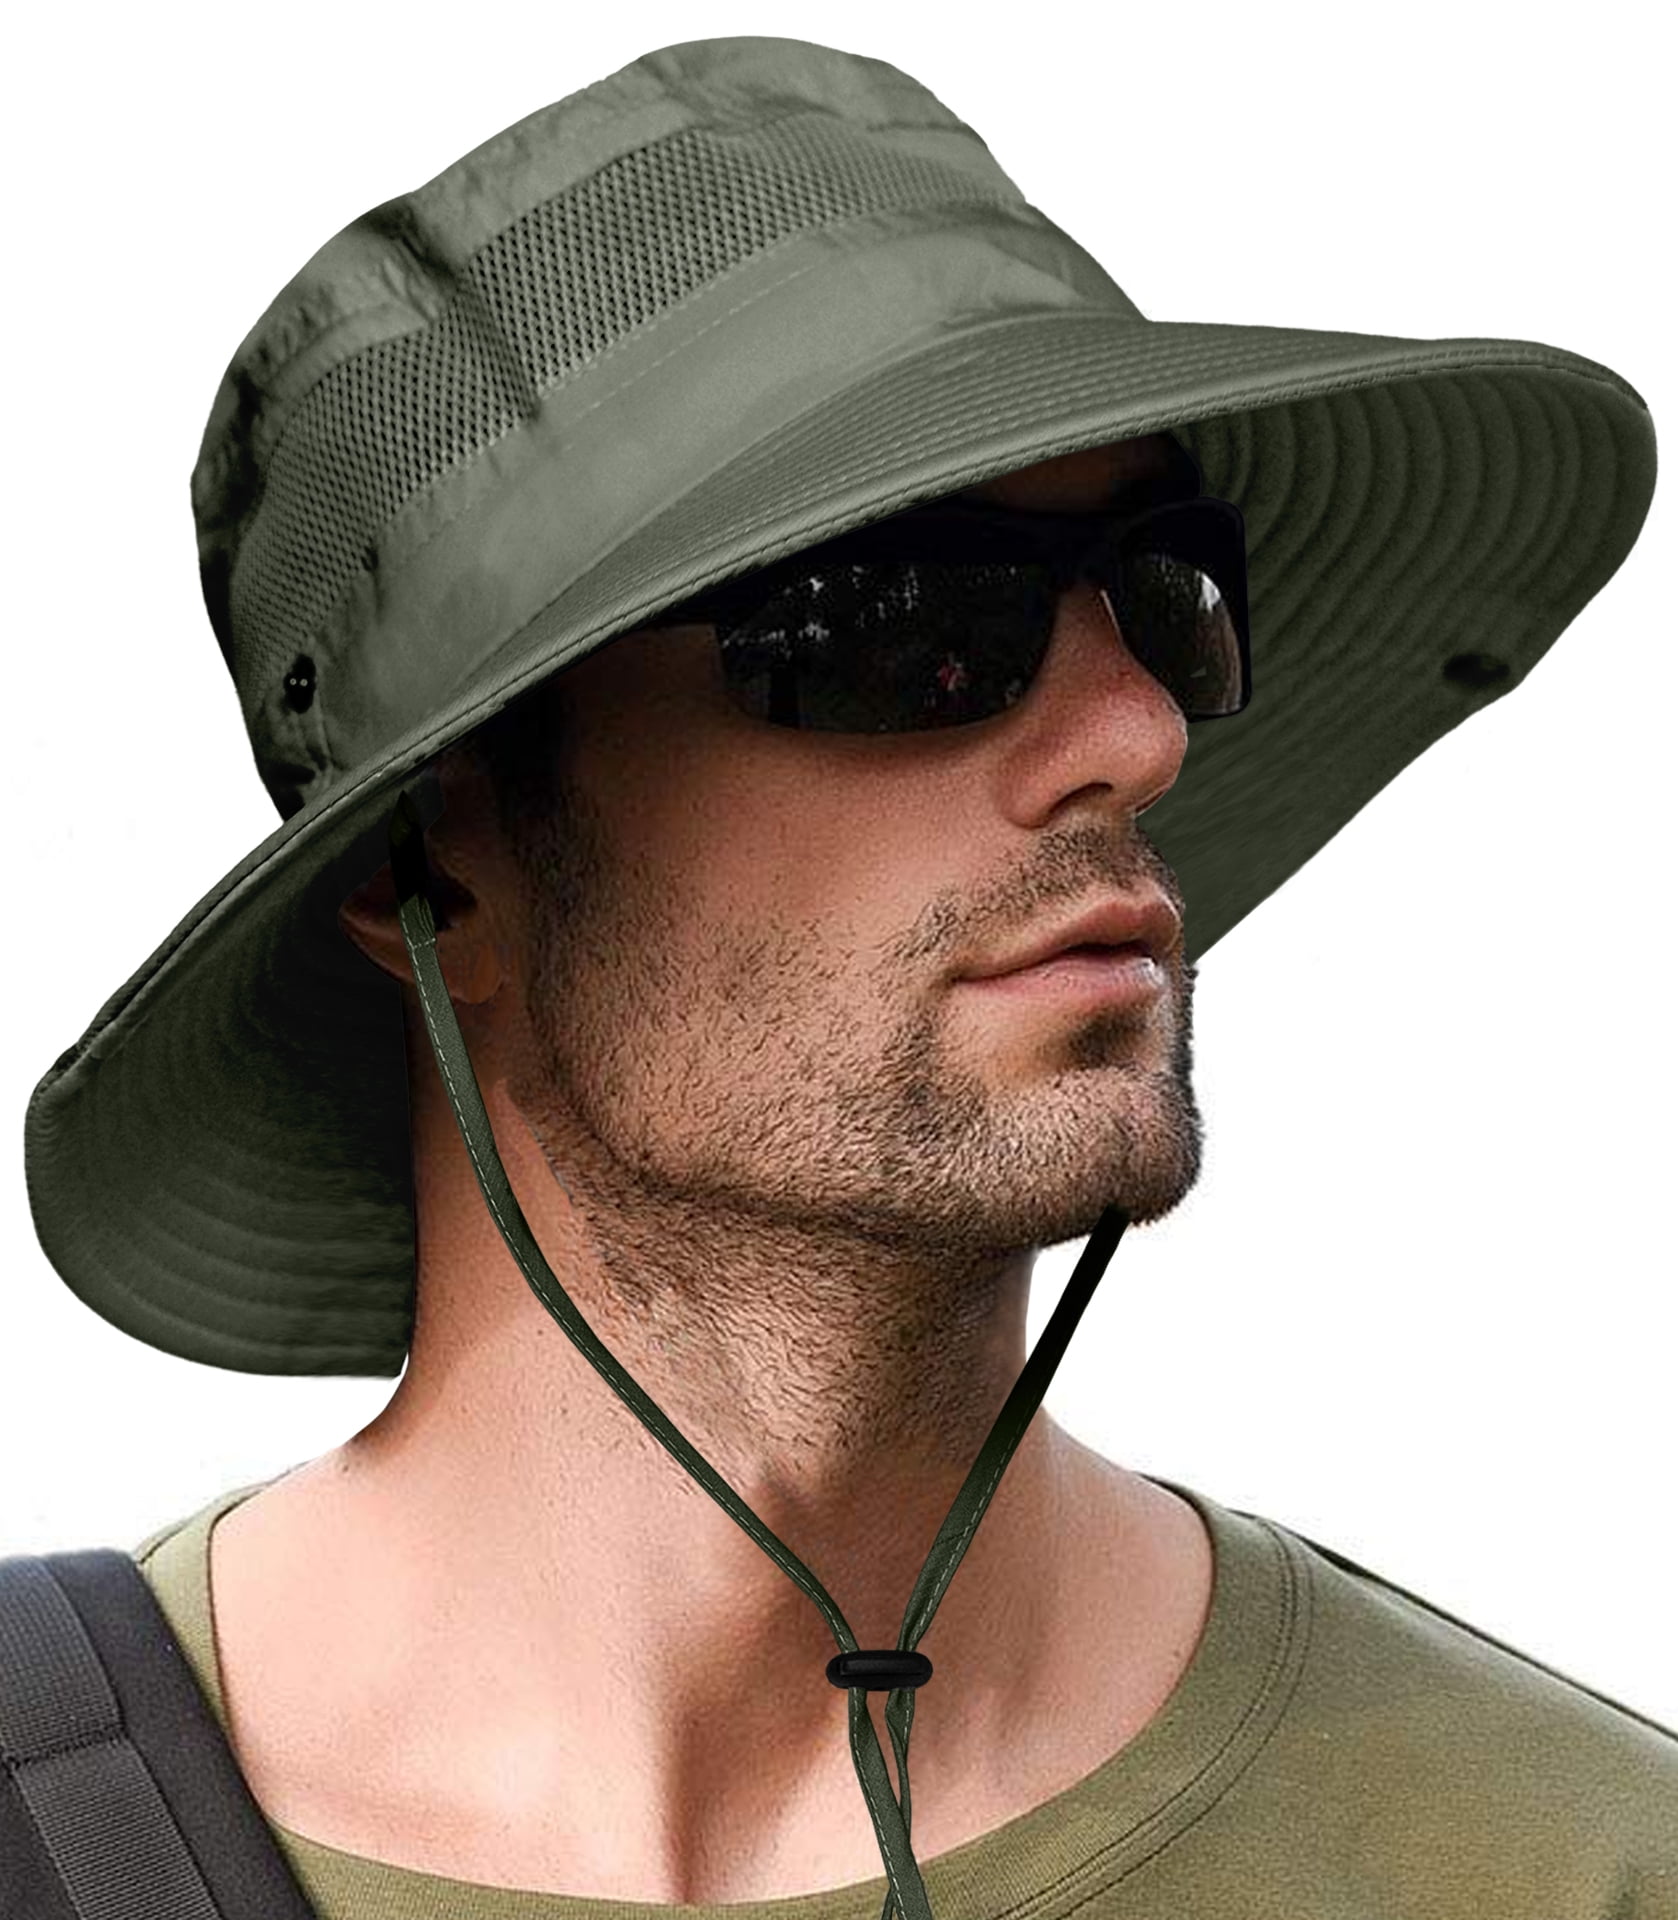 GearTOP Wide Brim Sun Hat for Men and Women - Mens Bucket Hats with UV  Protection for Hiking - Beach Hats for Women UPF 50+ (Army Green, 7-7 1/2)  